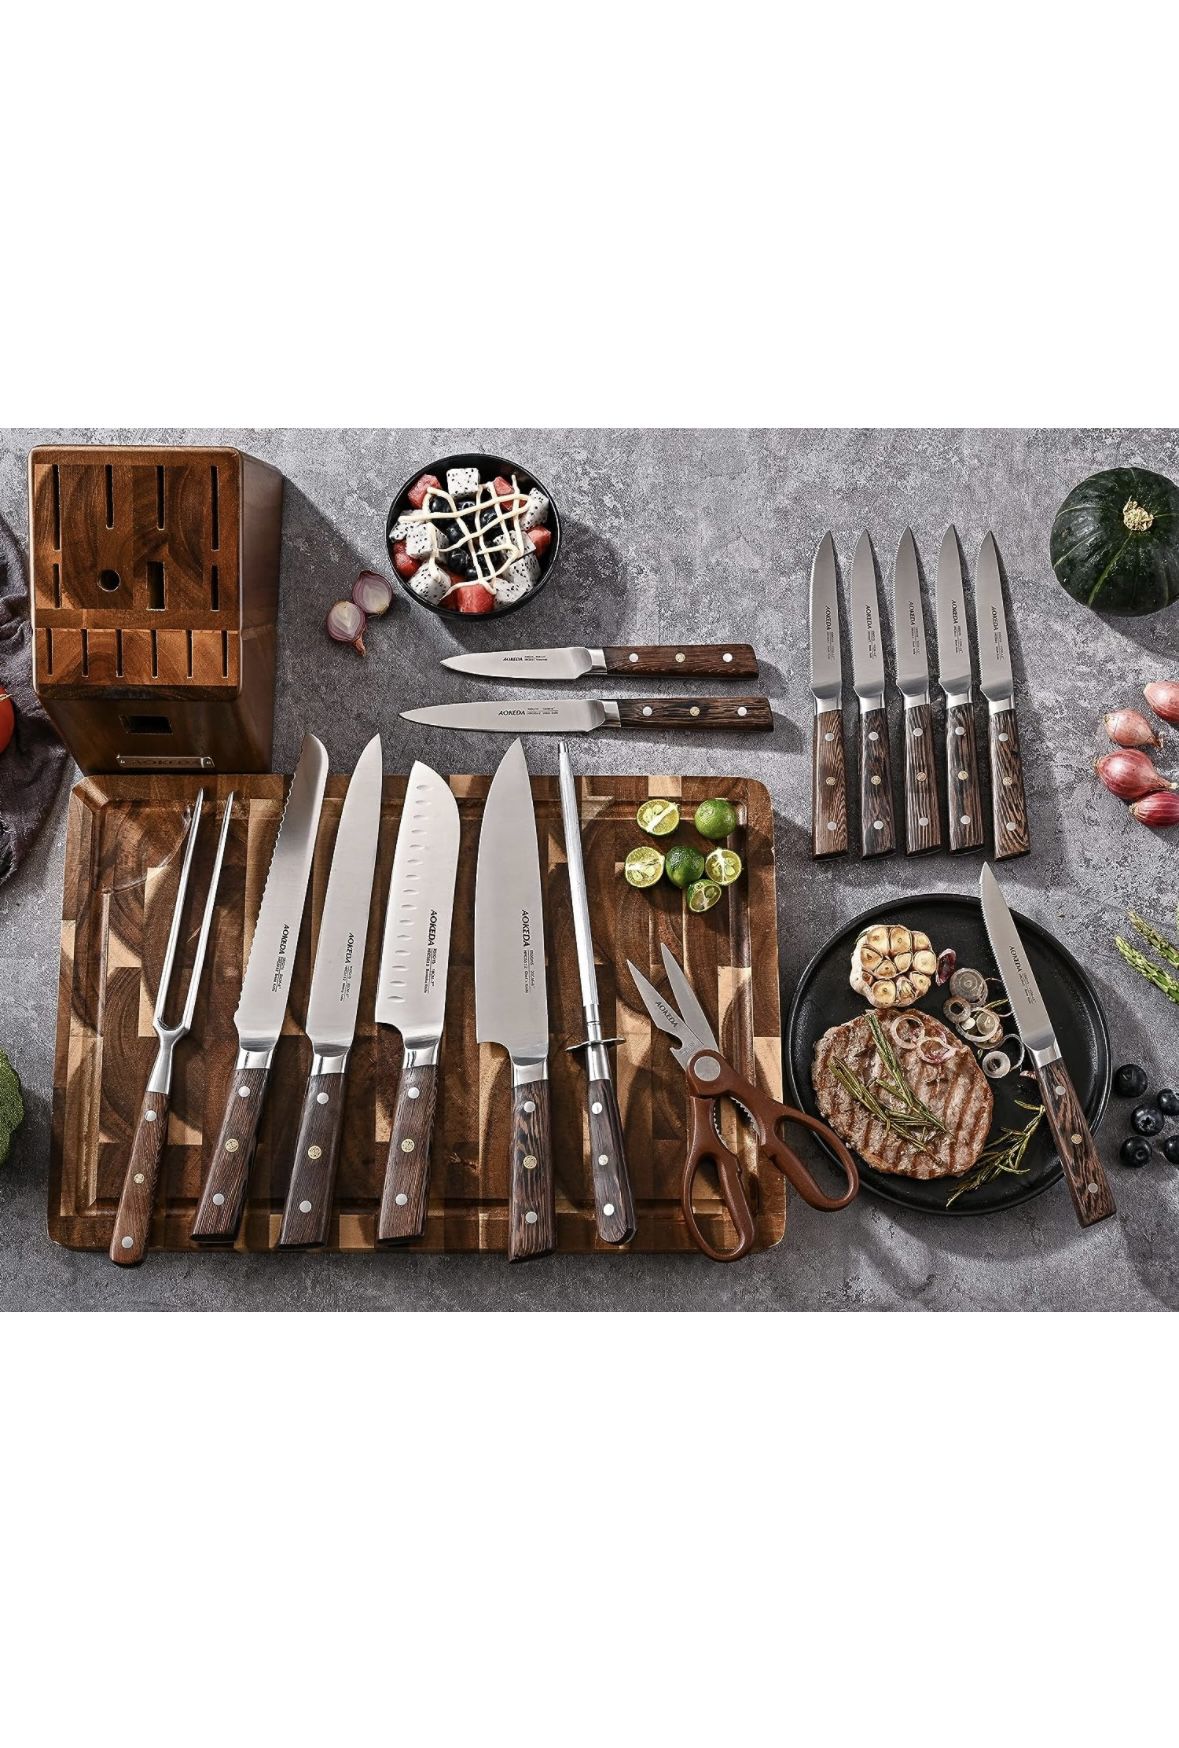  AOKEDA 16-Piece Kitchen Knife Set with Block, High